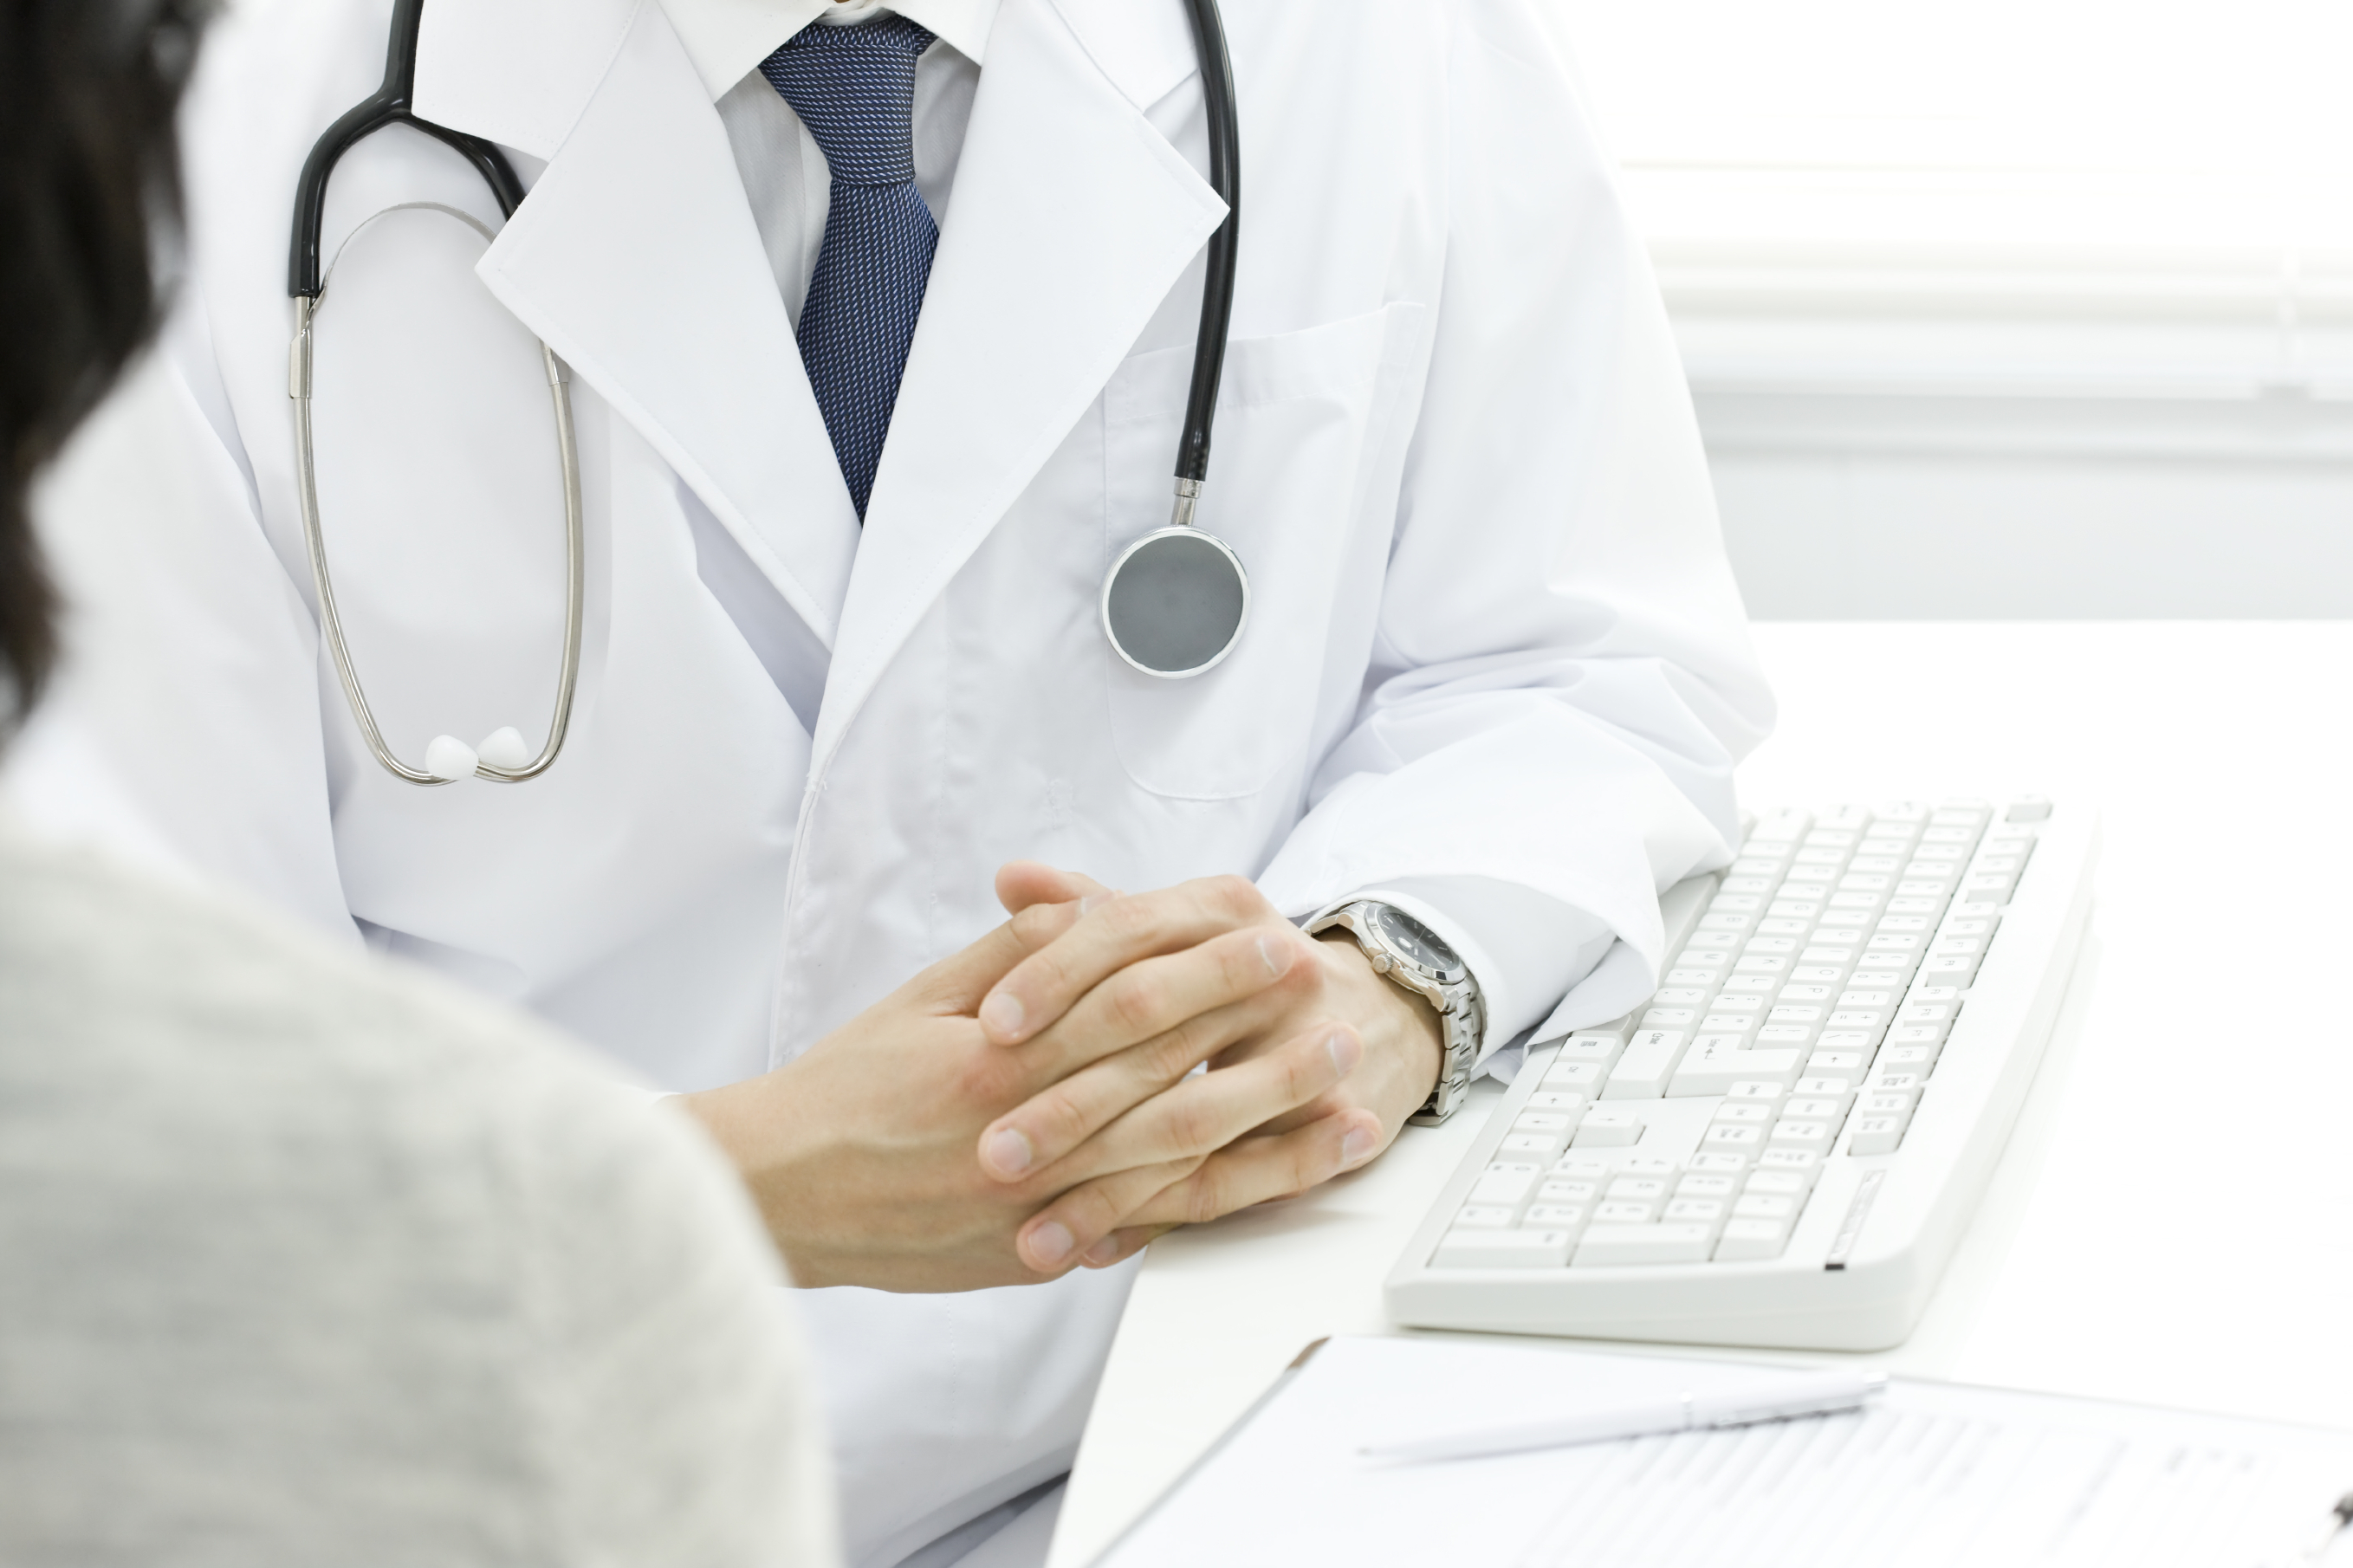 do-you-really-need-an-annual-physical-doctors-disagree-cbs-news